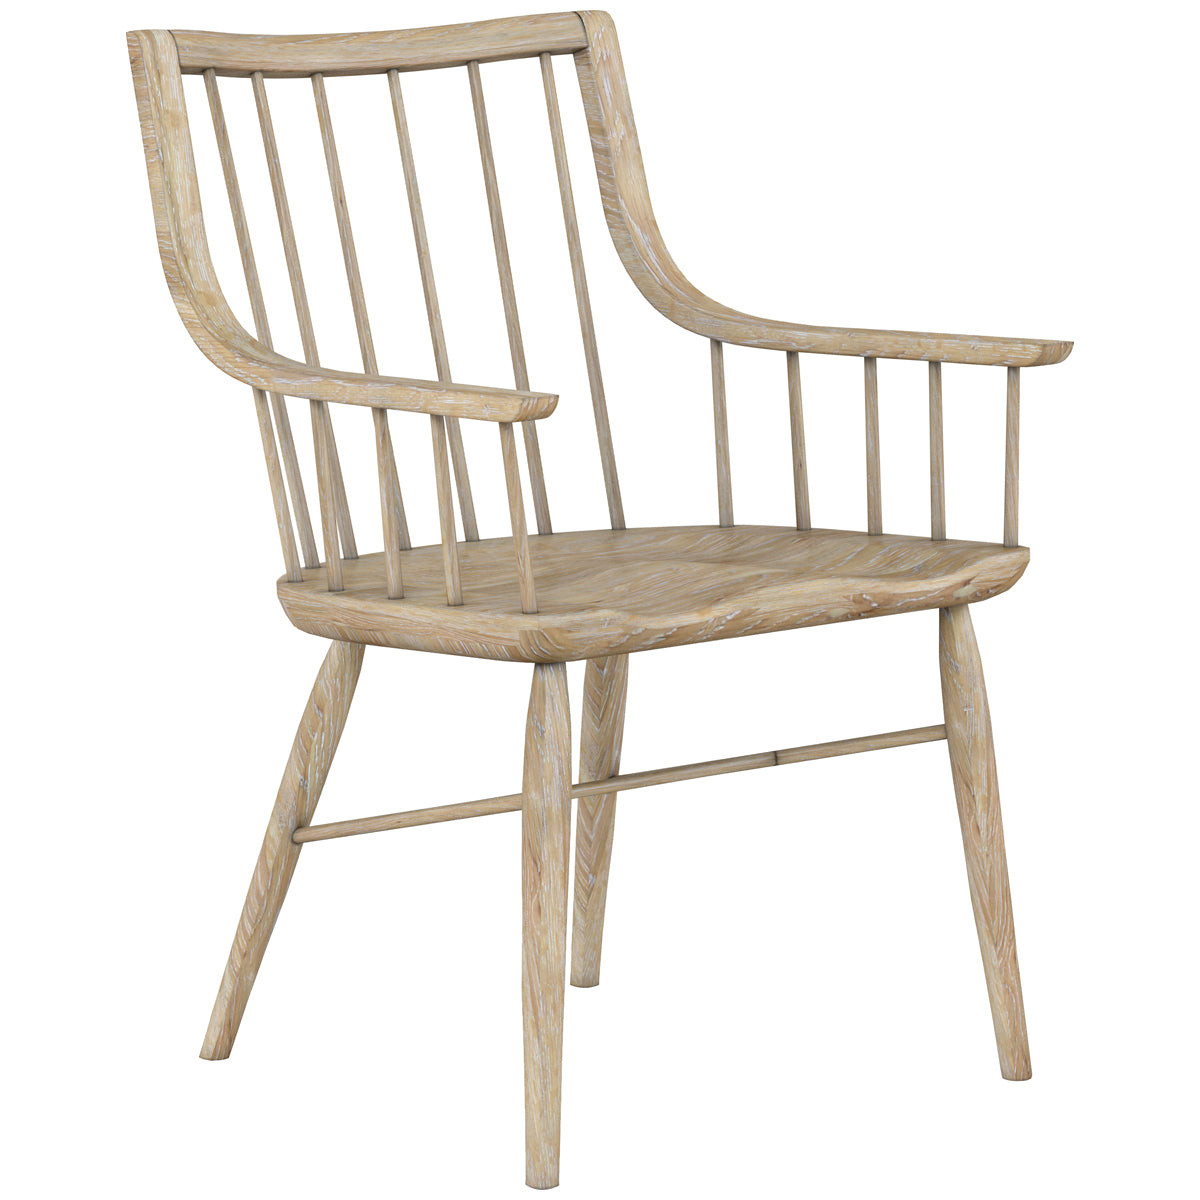 A.R.T. Furniture Frame Windsor Arm Chair, Set of 2